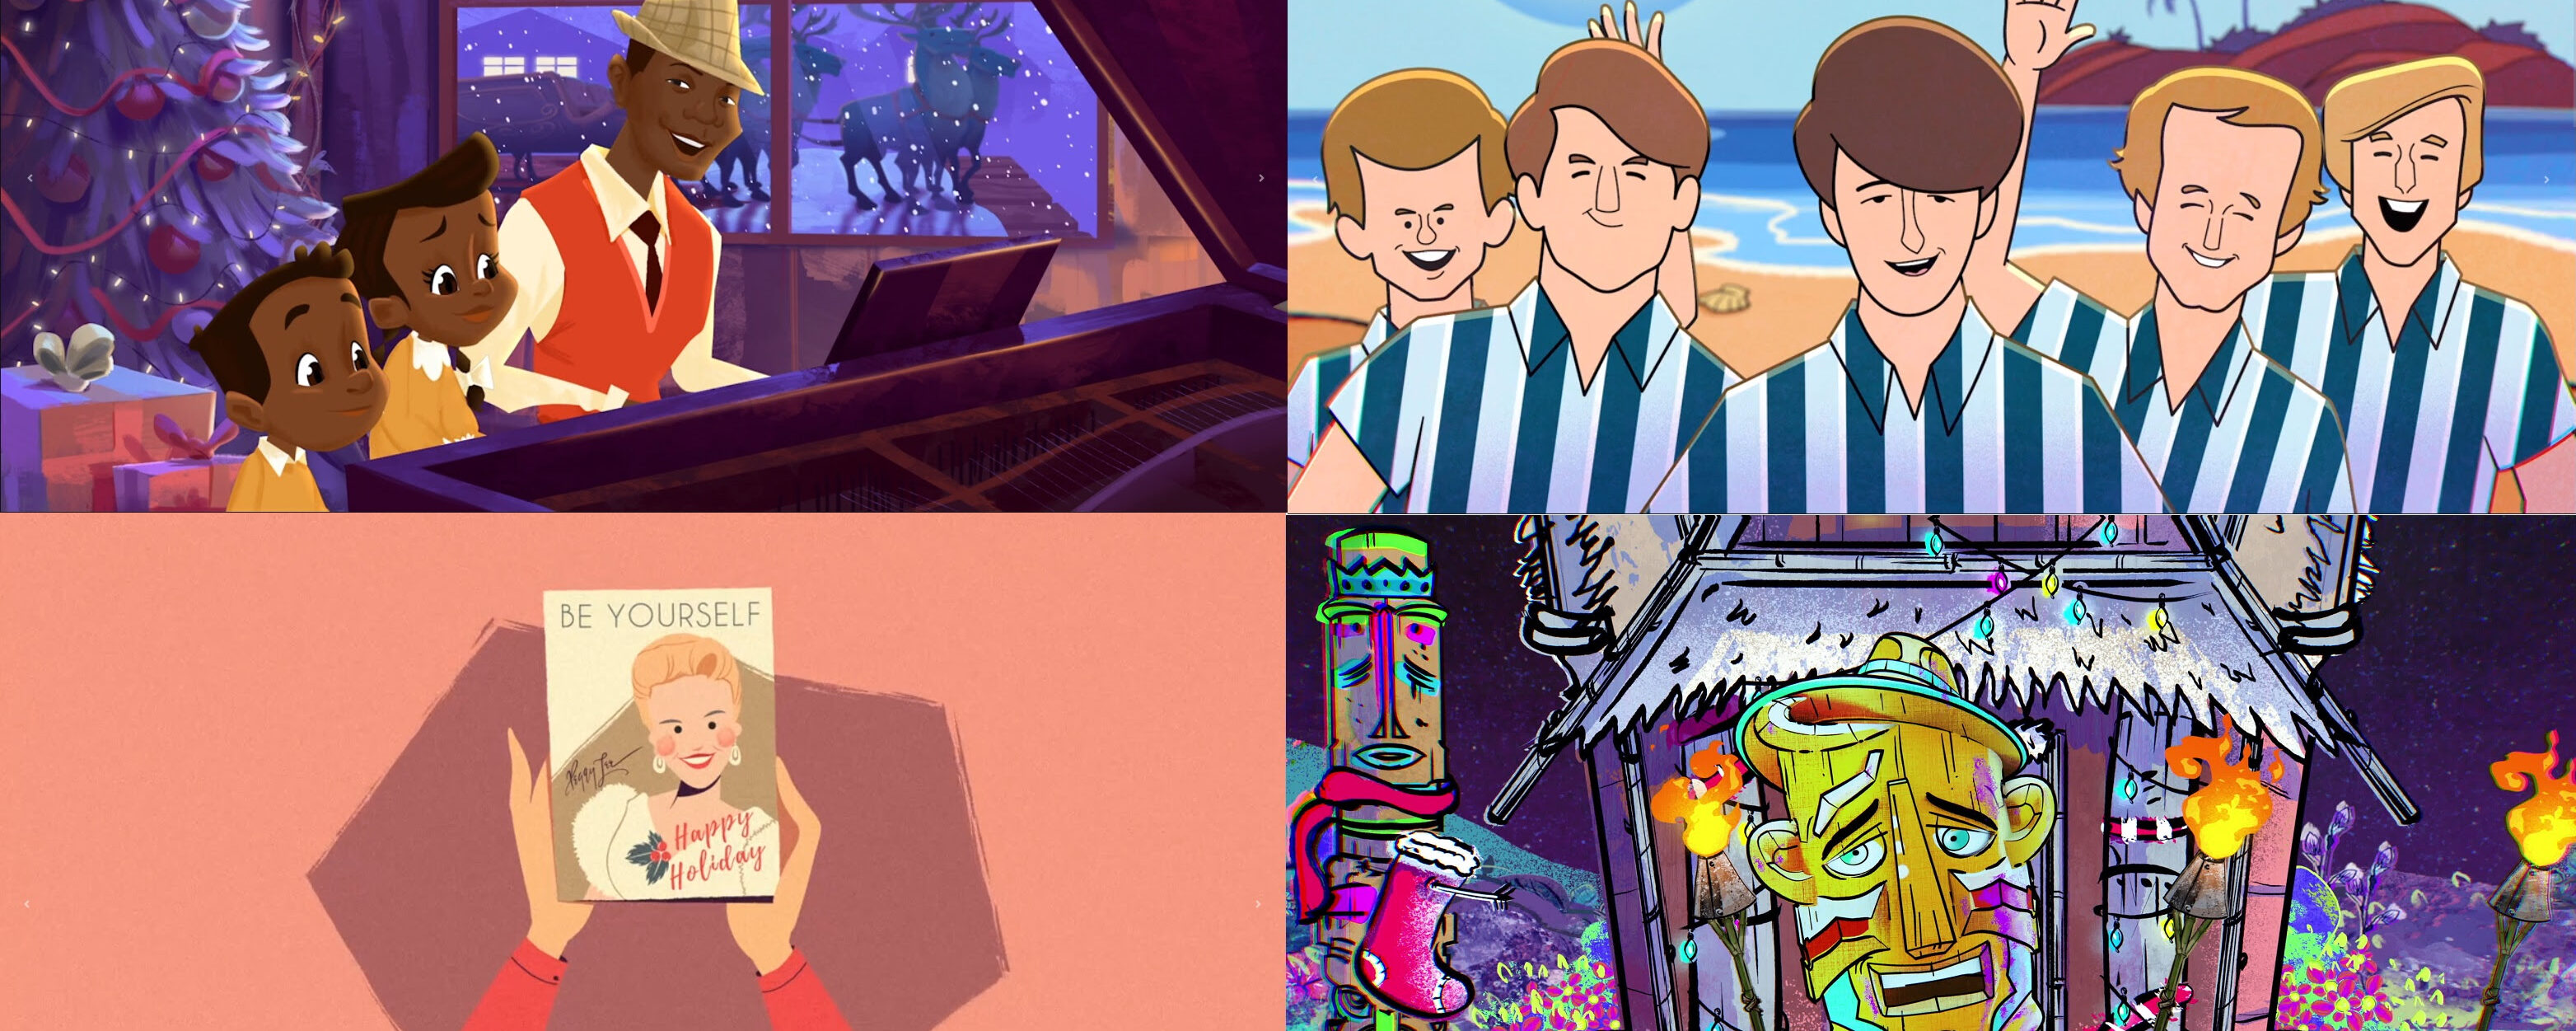 The Beach Boys, Bing Crosby, Nat King Cole and Peggy Lee Receive Animated Treatment for Holiday Hits